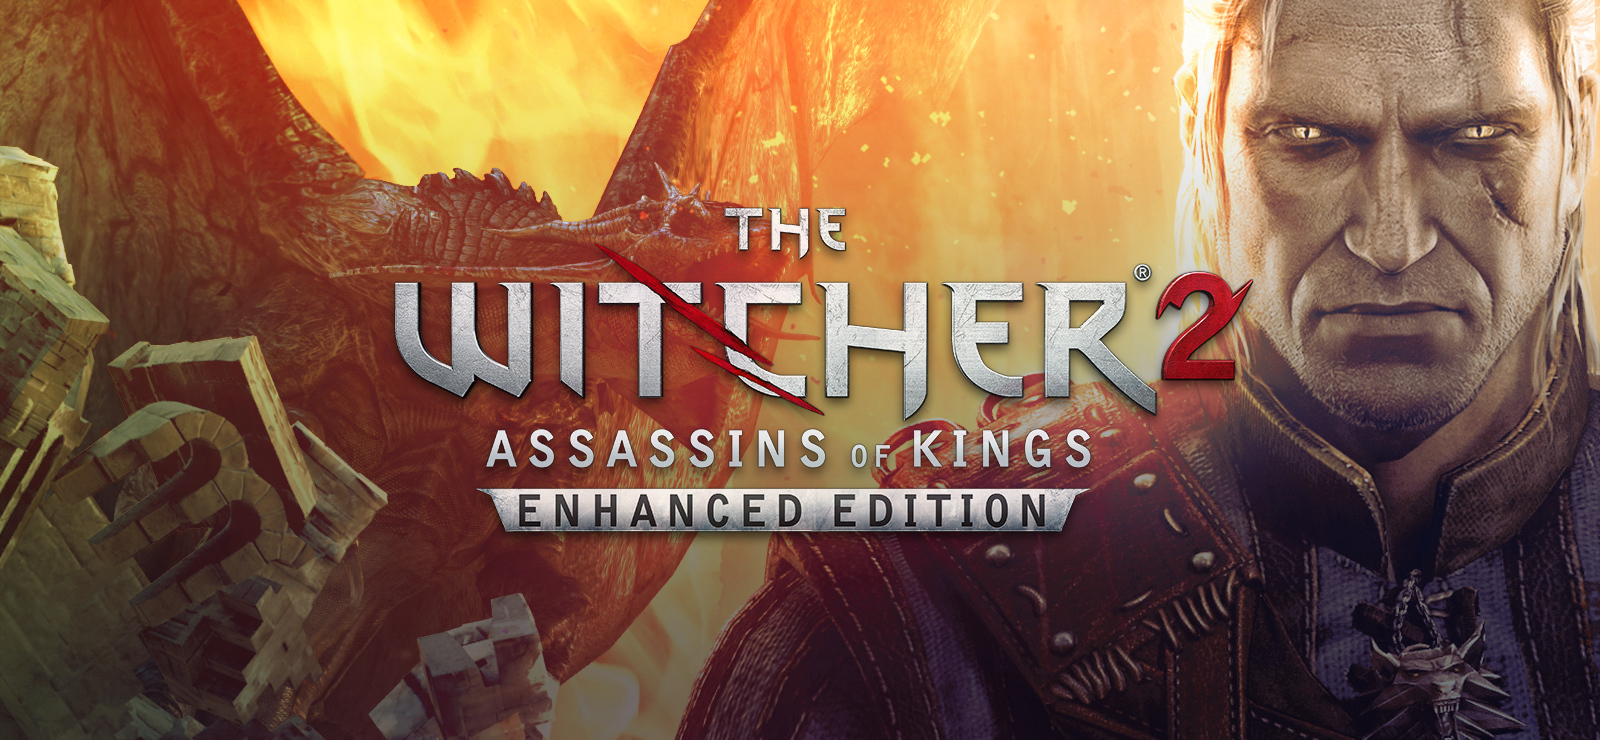 The witcher 2 assassins of kings стим фото 3